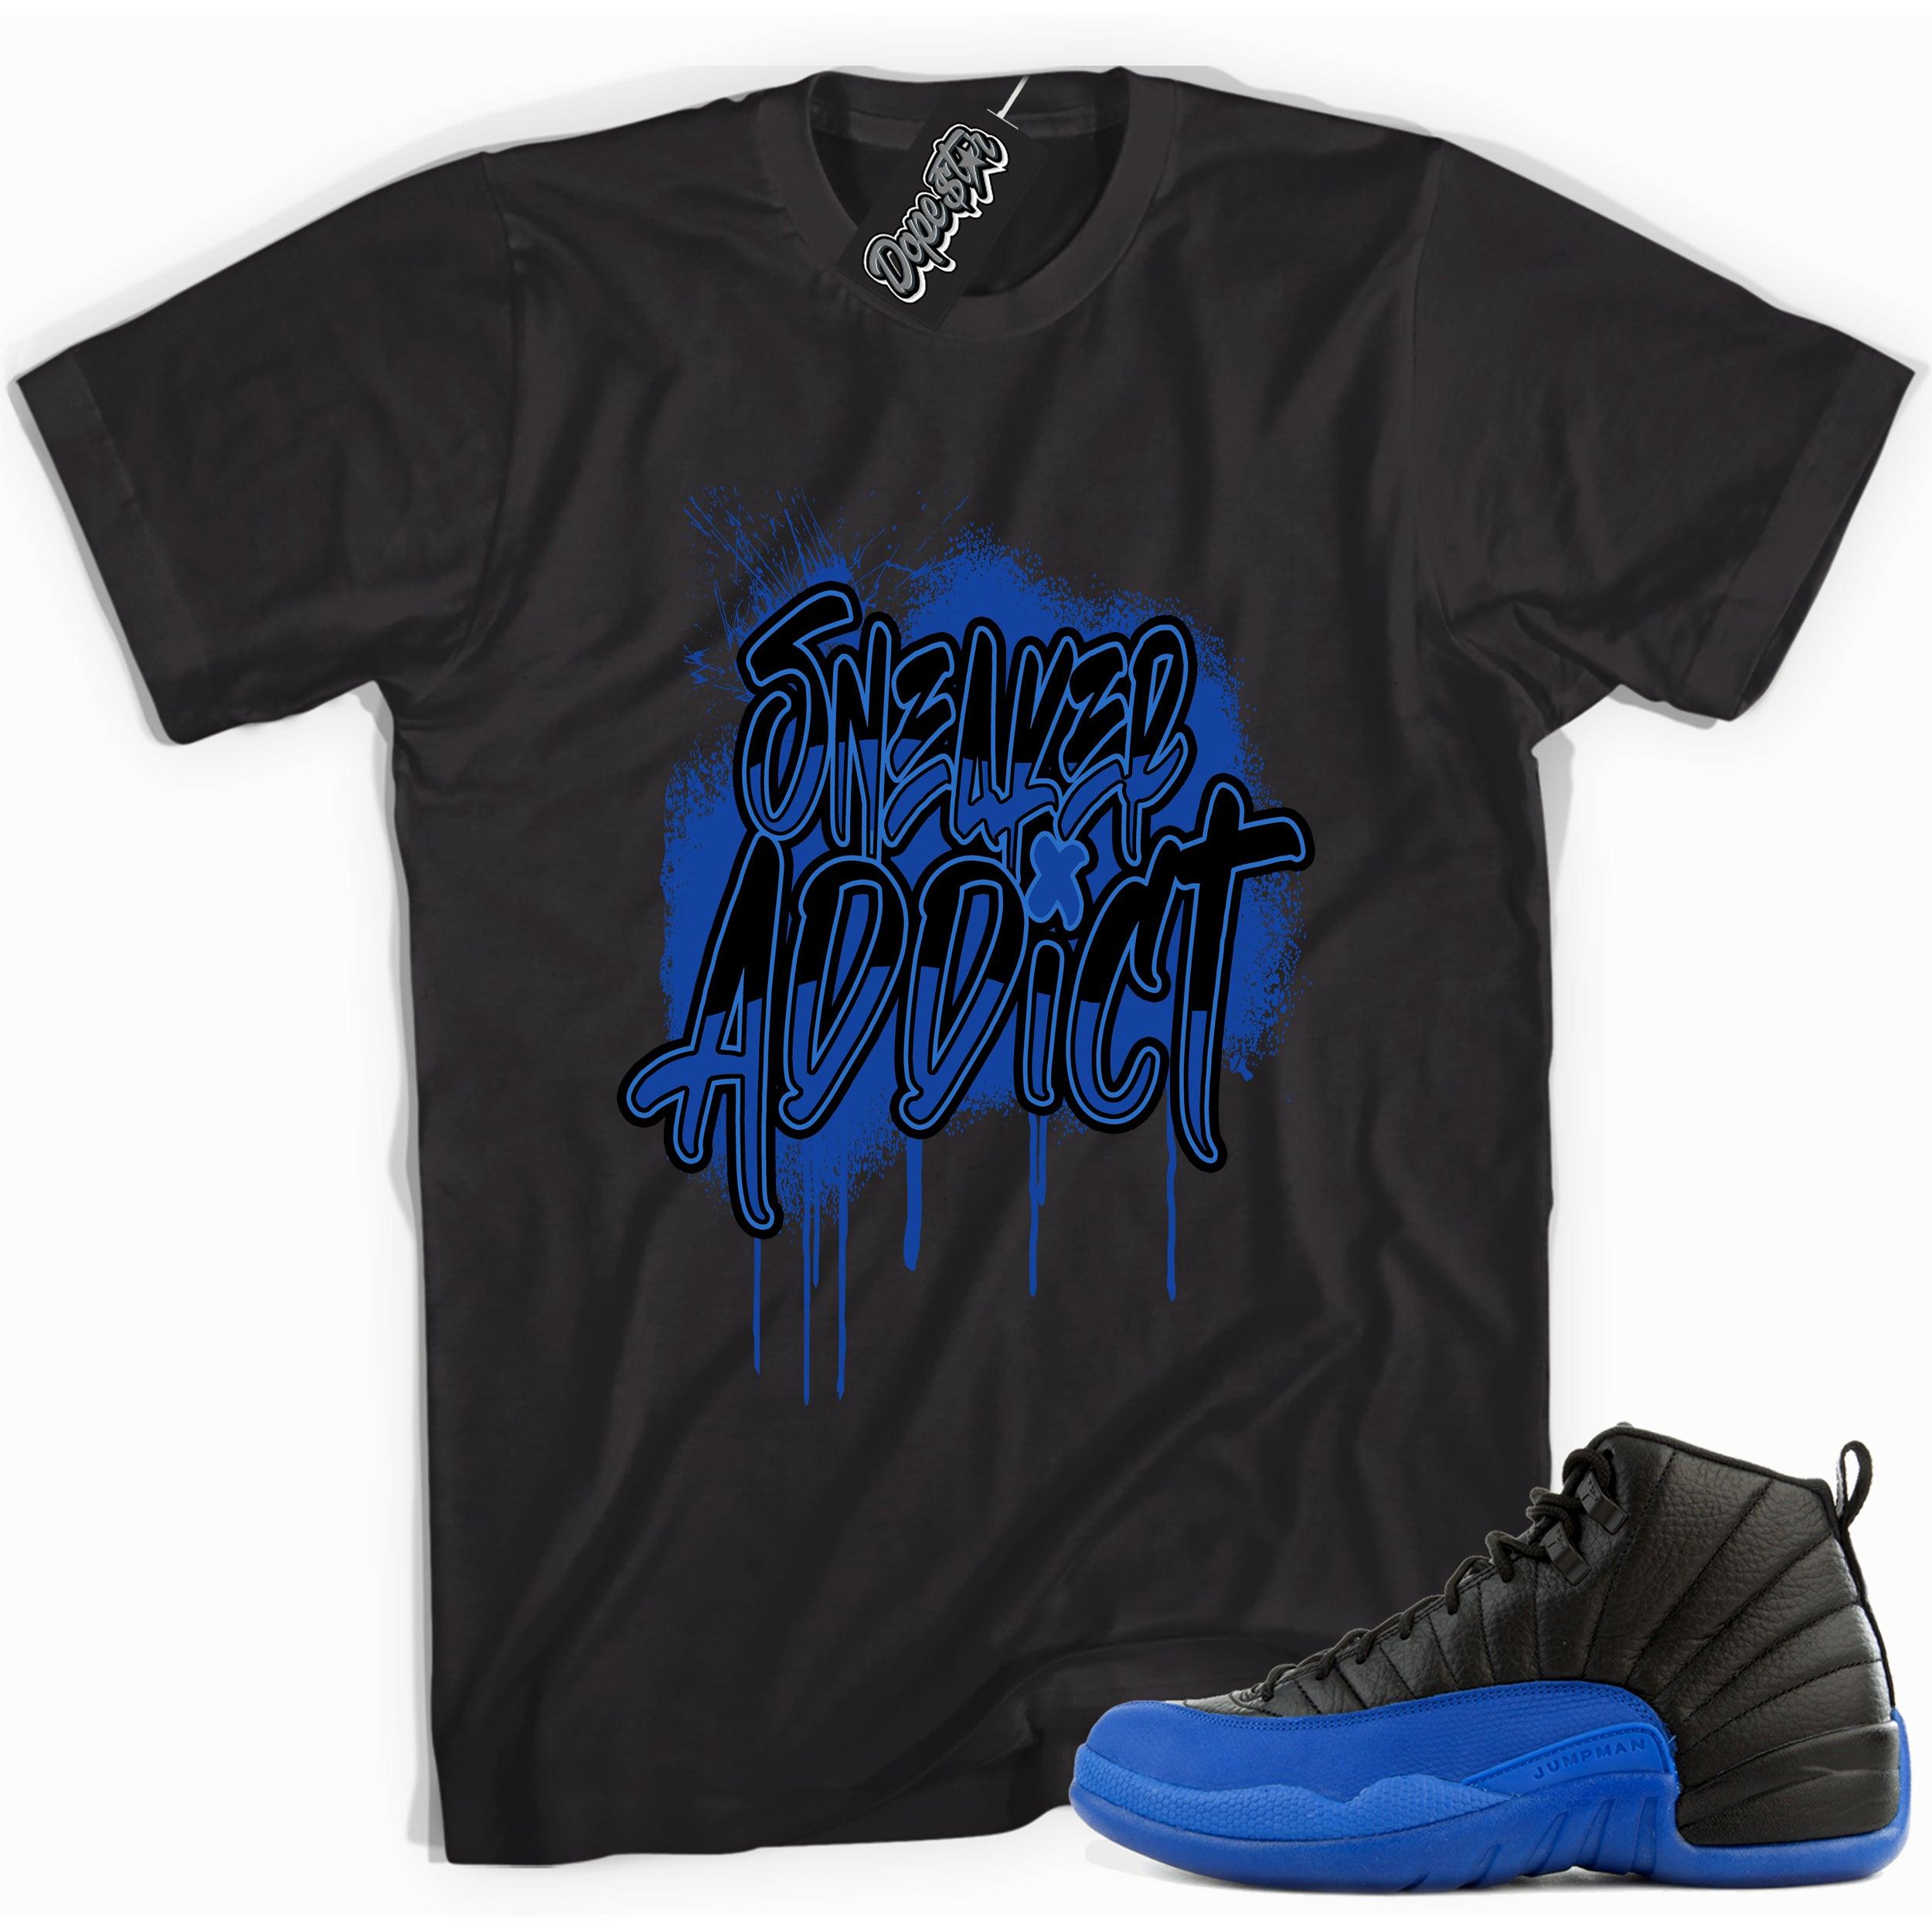 Cool black graphic tee with 'sneaker addict' print, that perfectly matches  Air Jordan 12 Retro Black Game Royal sneakers.